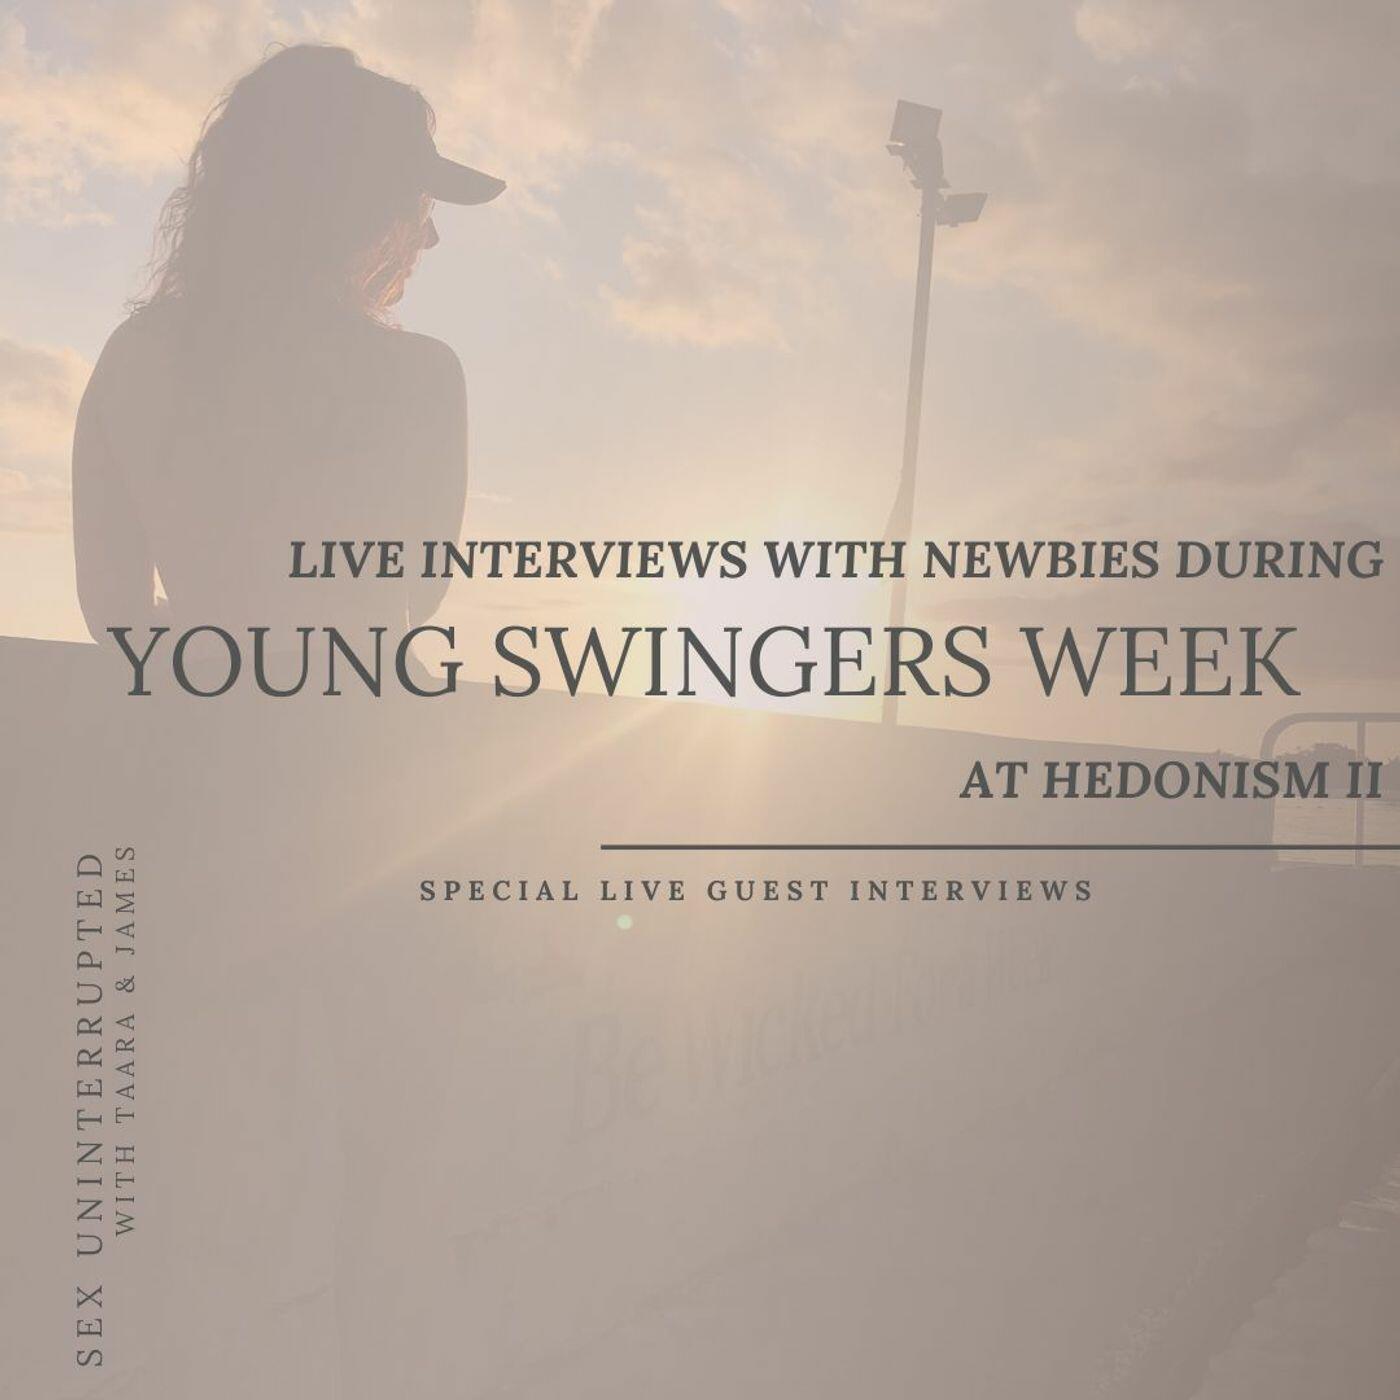 Show 55 Live Interviews with Newbies during Young Swingers Week at Hedonism II pic